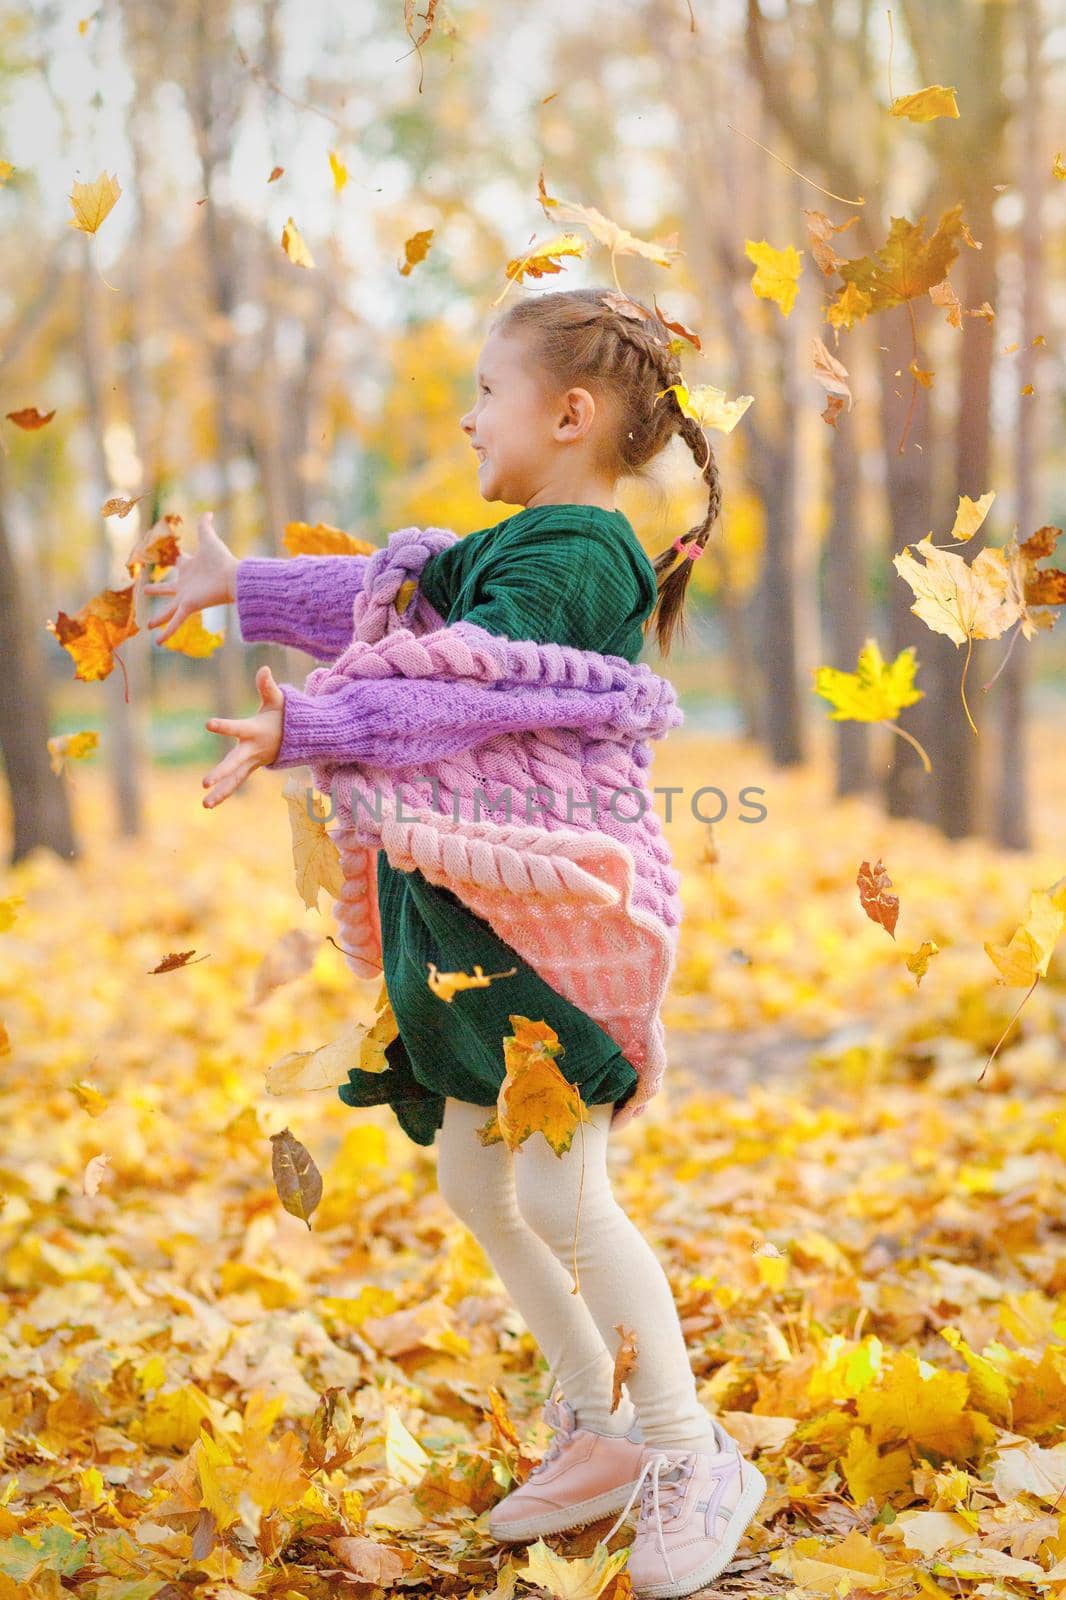 Happy cauxasian girl smiling joyful throws up autumn leaves outside in fall forest.